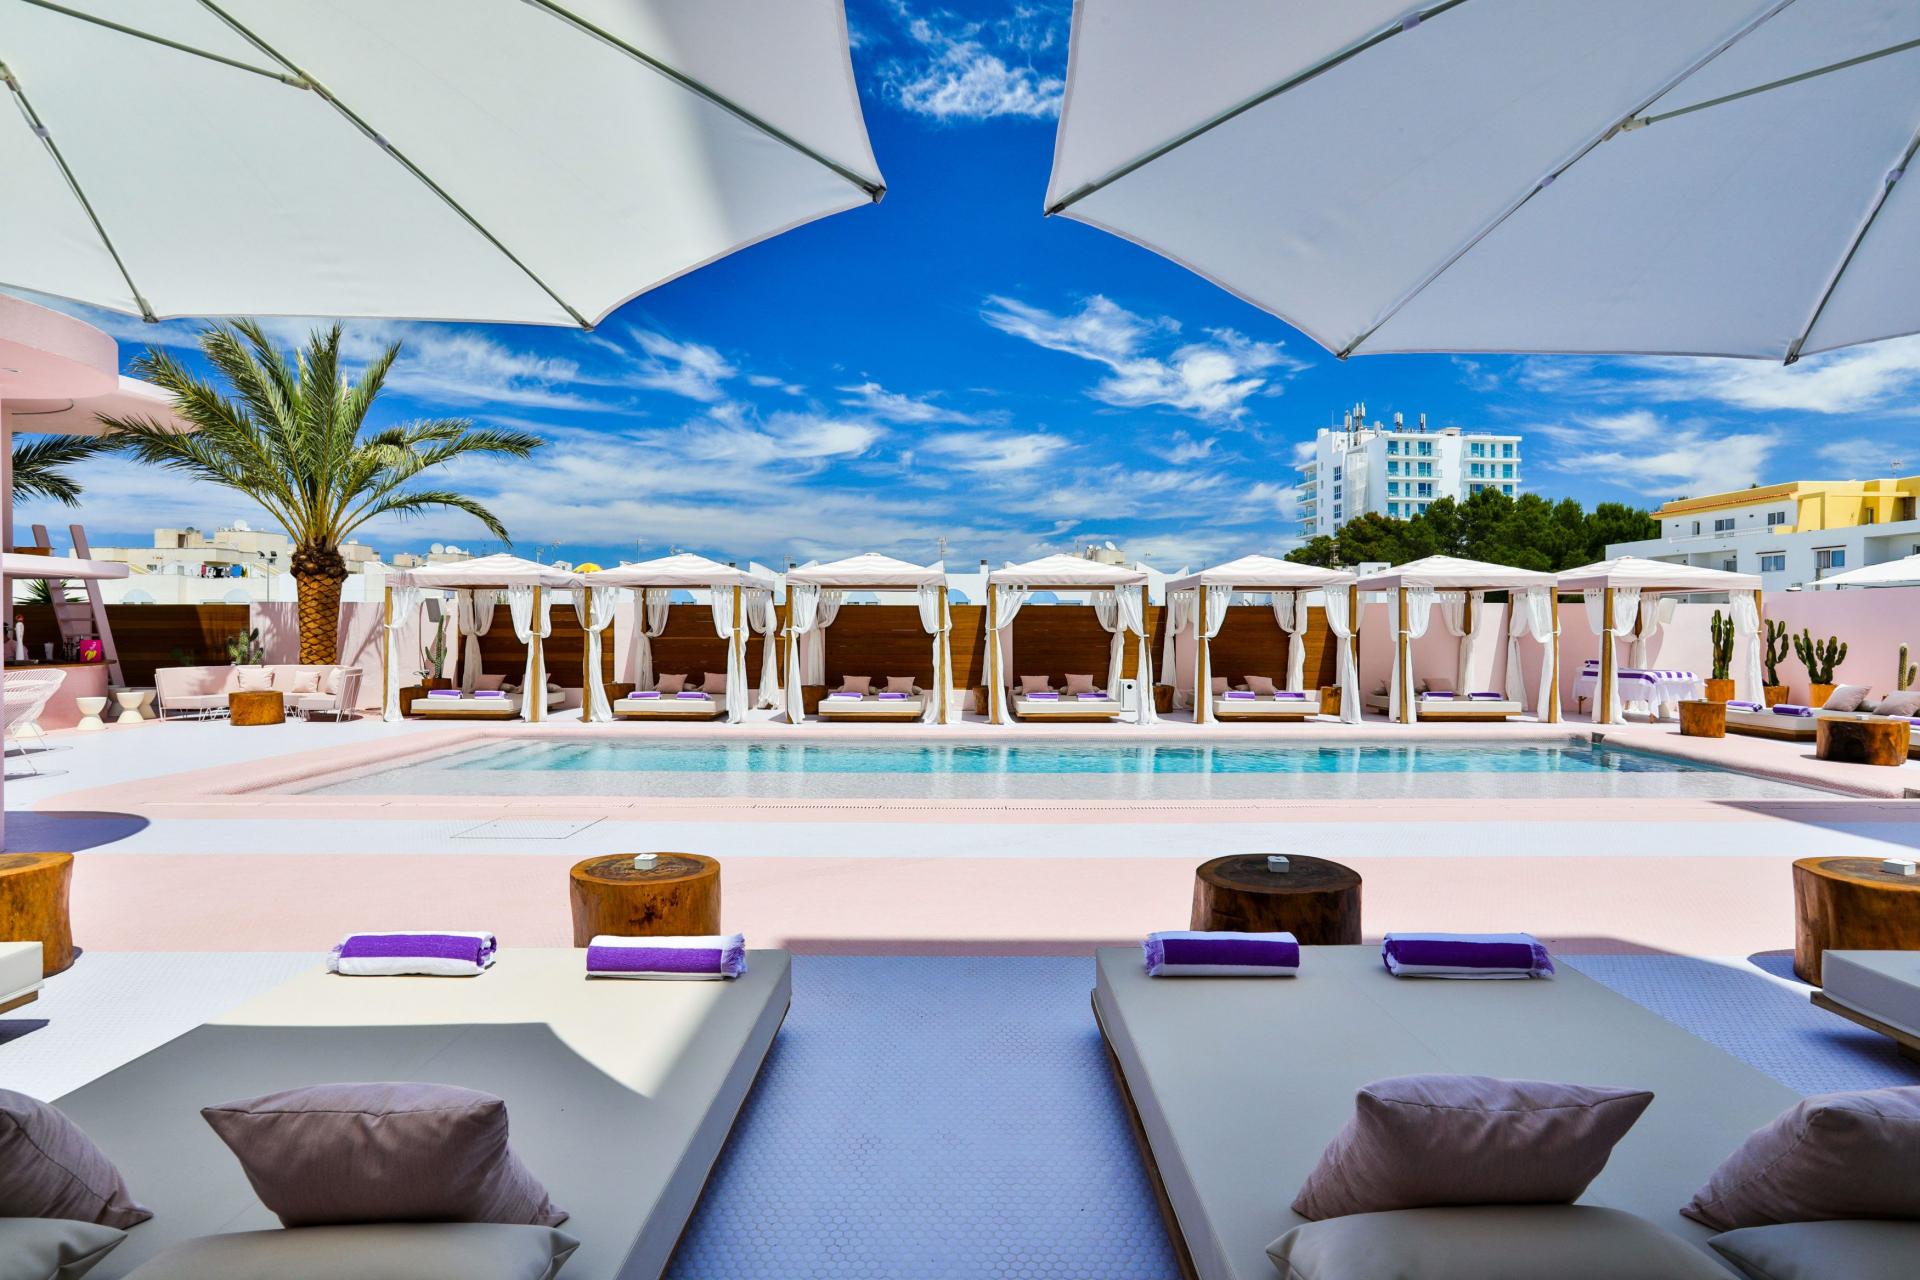 Feast For the Senses: A Pastel Paradise in Ibiza